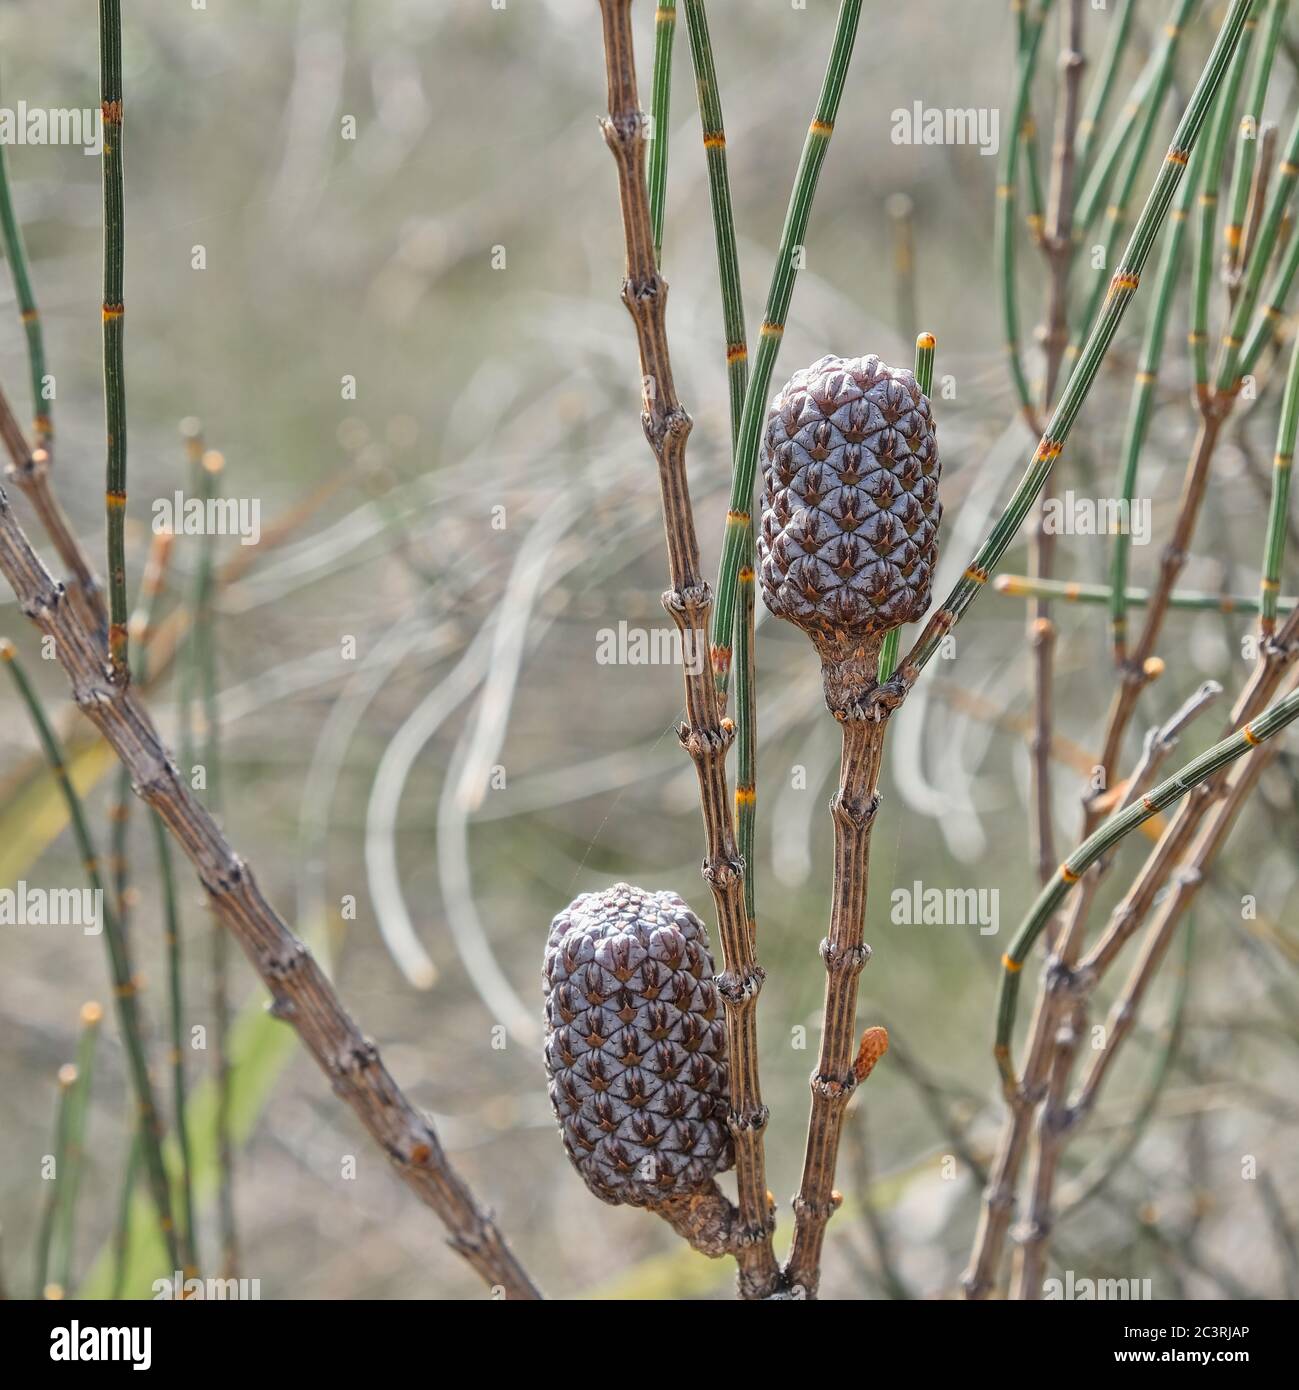 Casuarina seed pods, a native Australian plant also known as She-oak. Stock Photo